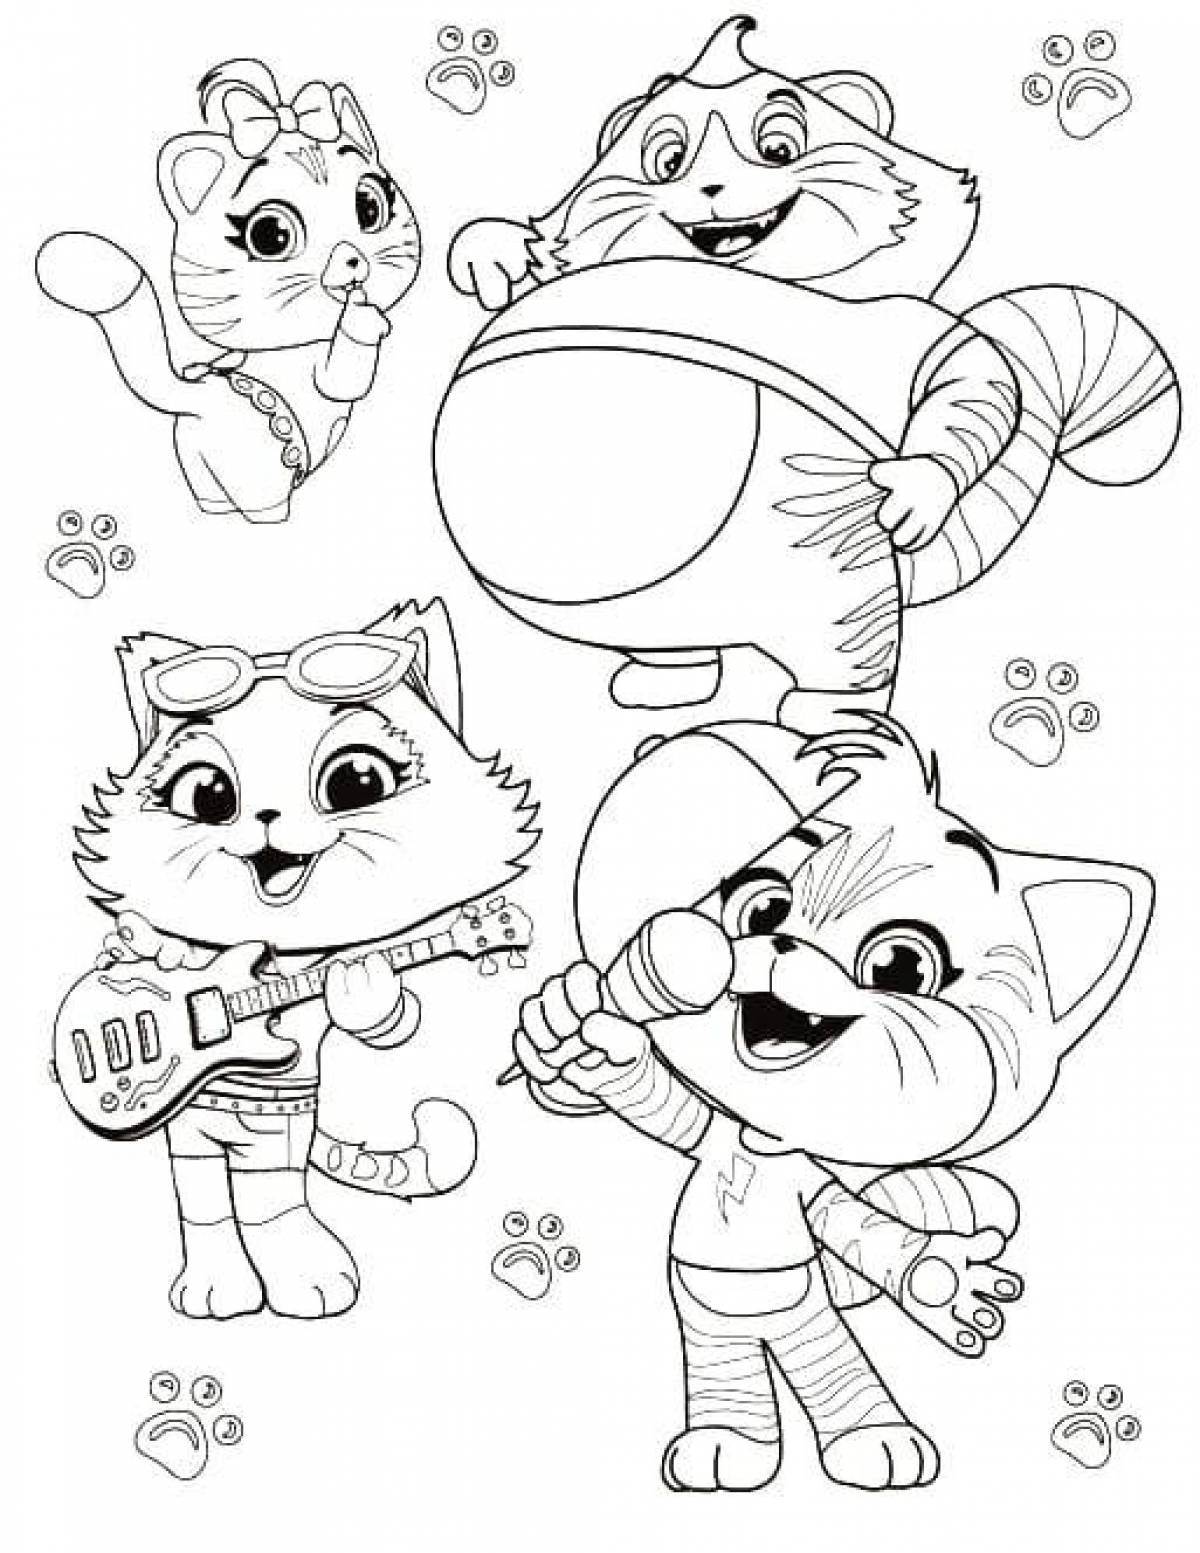 Colouring friendly kittens